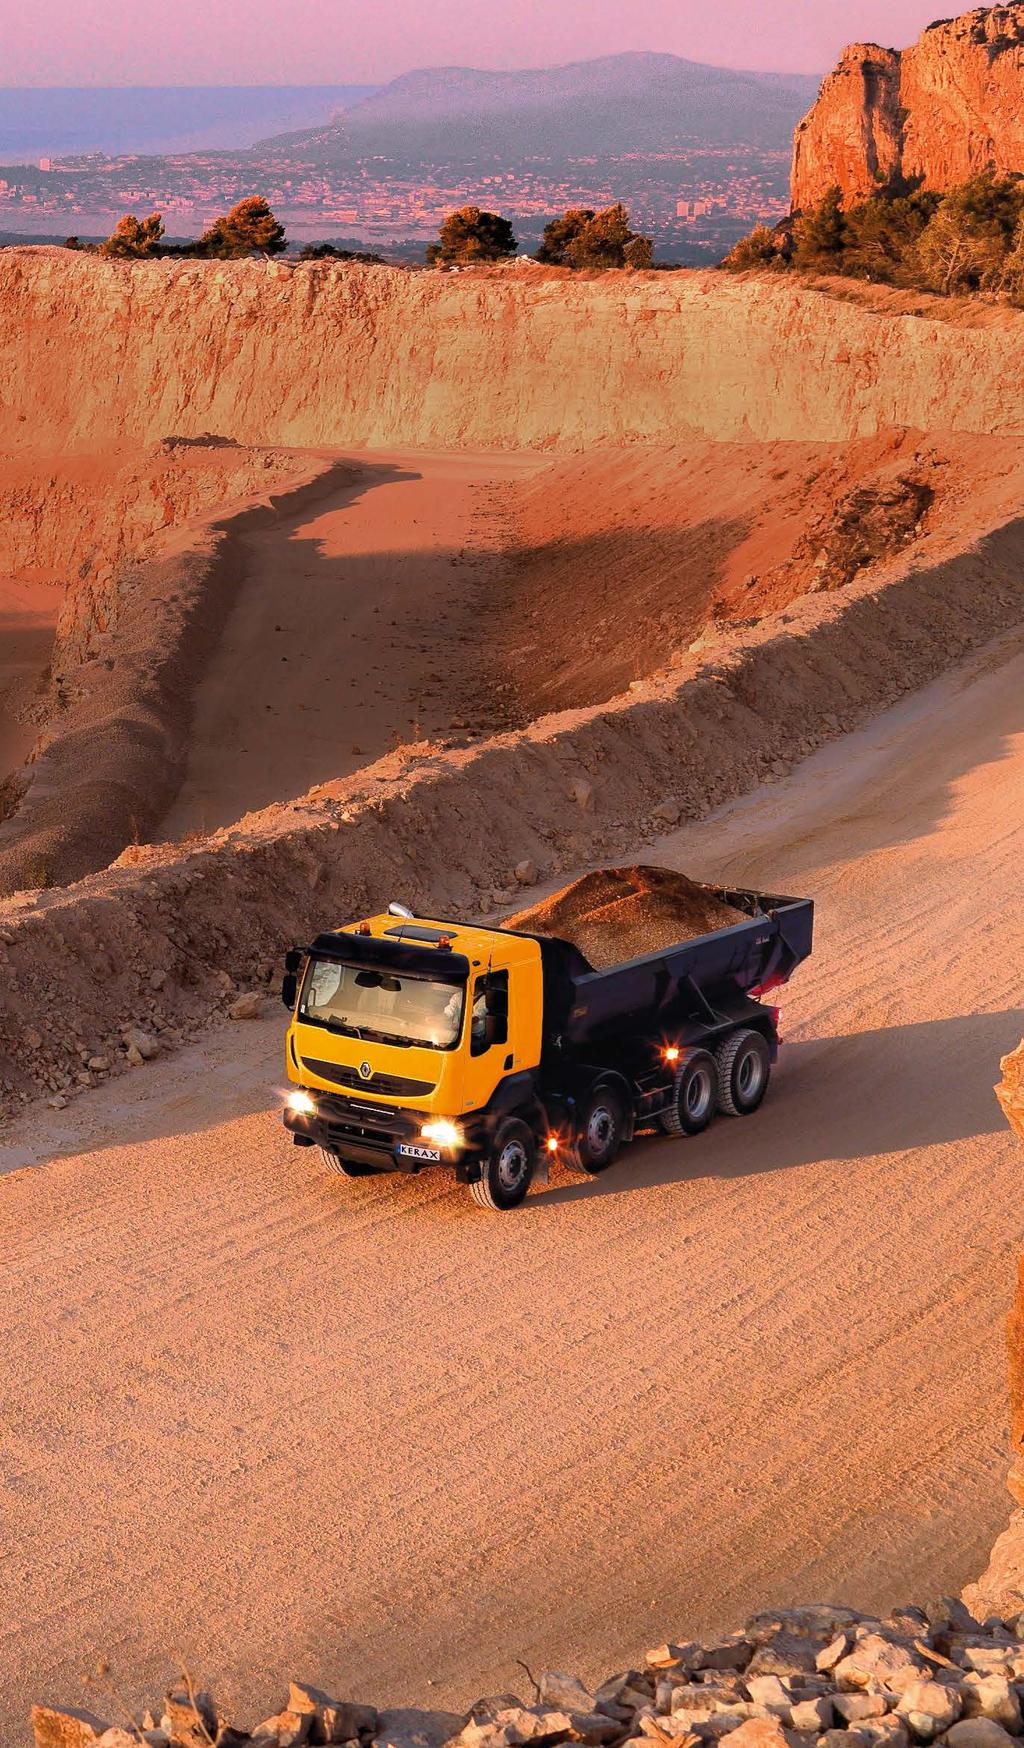 strong on robustness renault trucks vehicles are designed to be robust tools capable of resisting the most challenging environments.